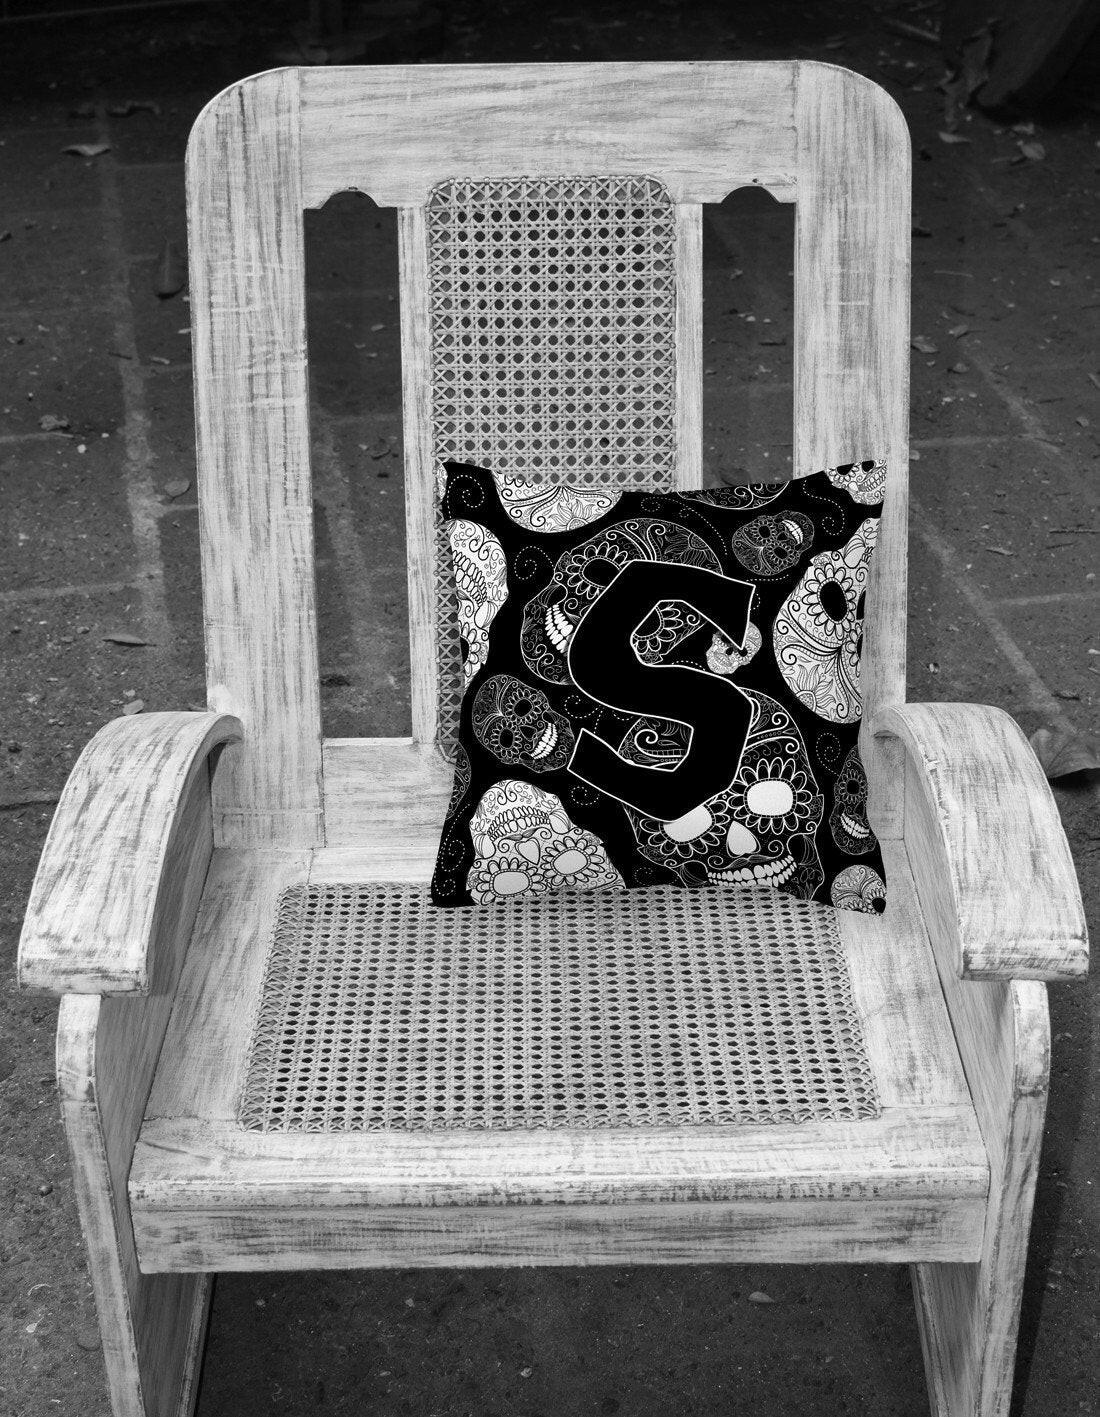 Letter S Day of the Dead Skulls Black Canvas Fabric Decorative Pillow CJ2008-SPW1414 by Caroline's Treasures